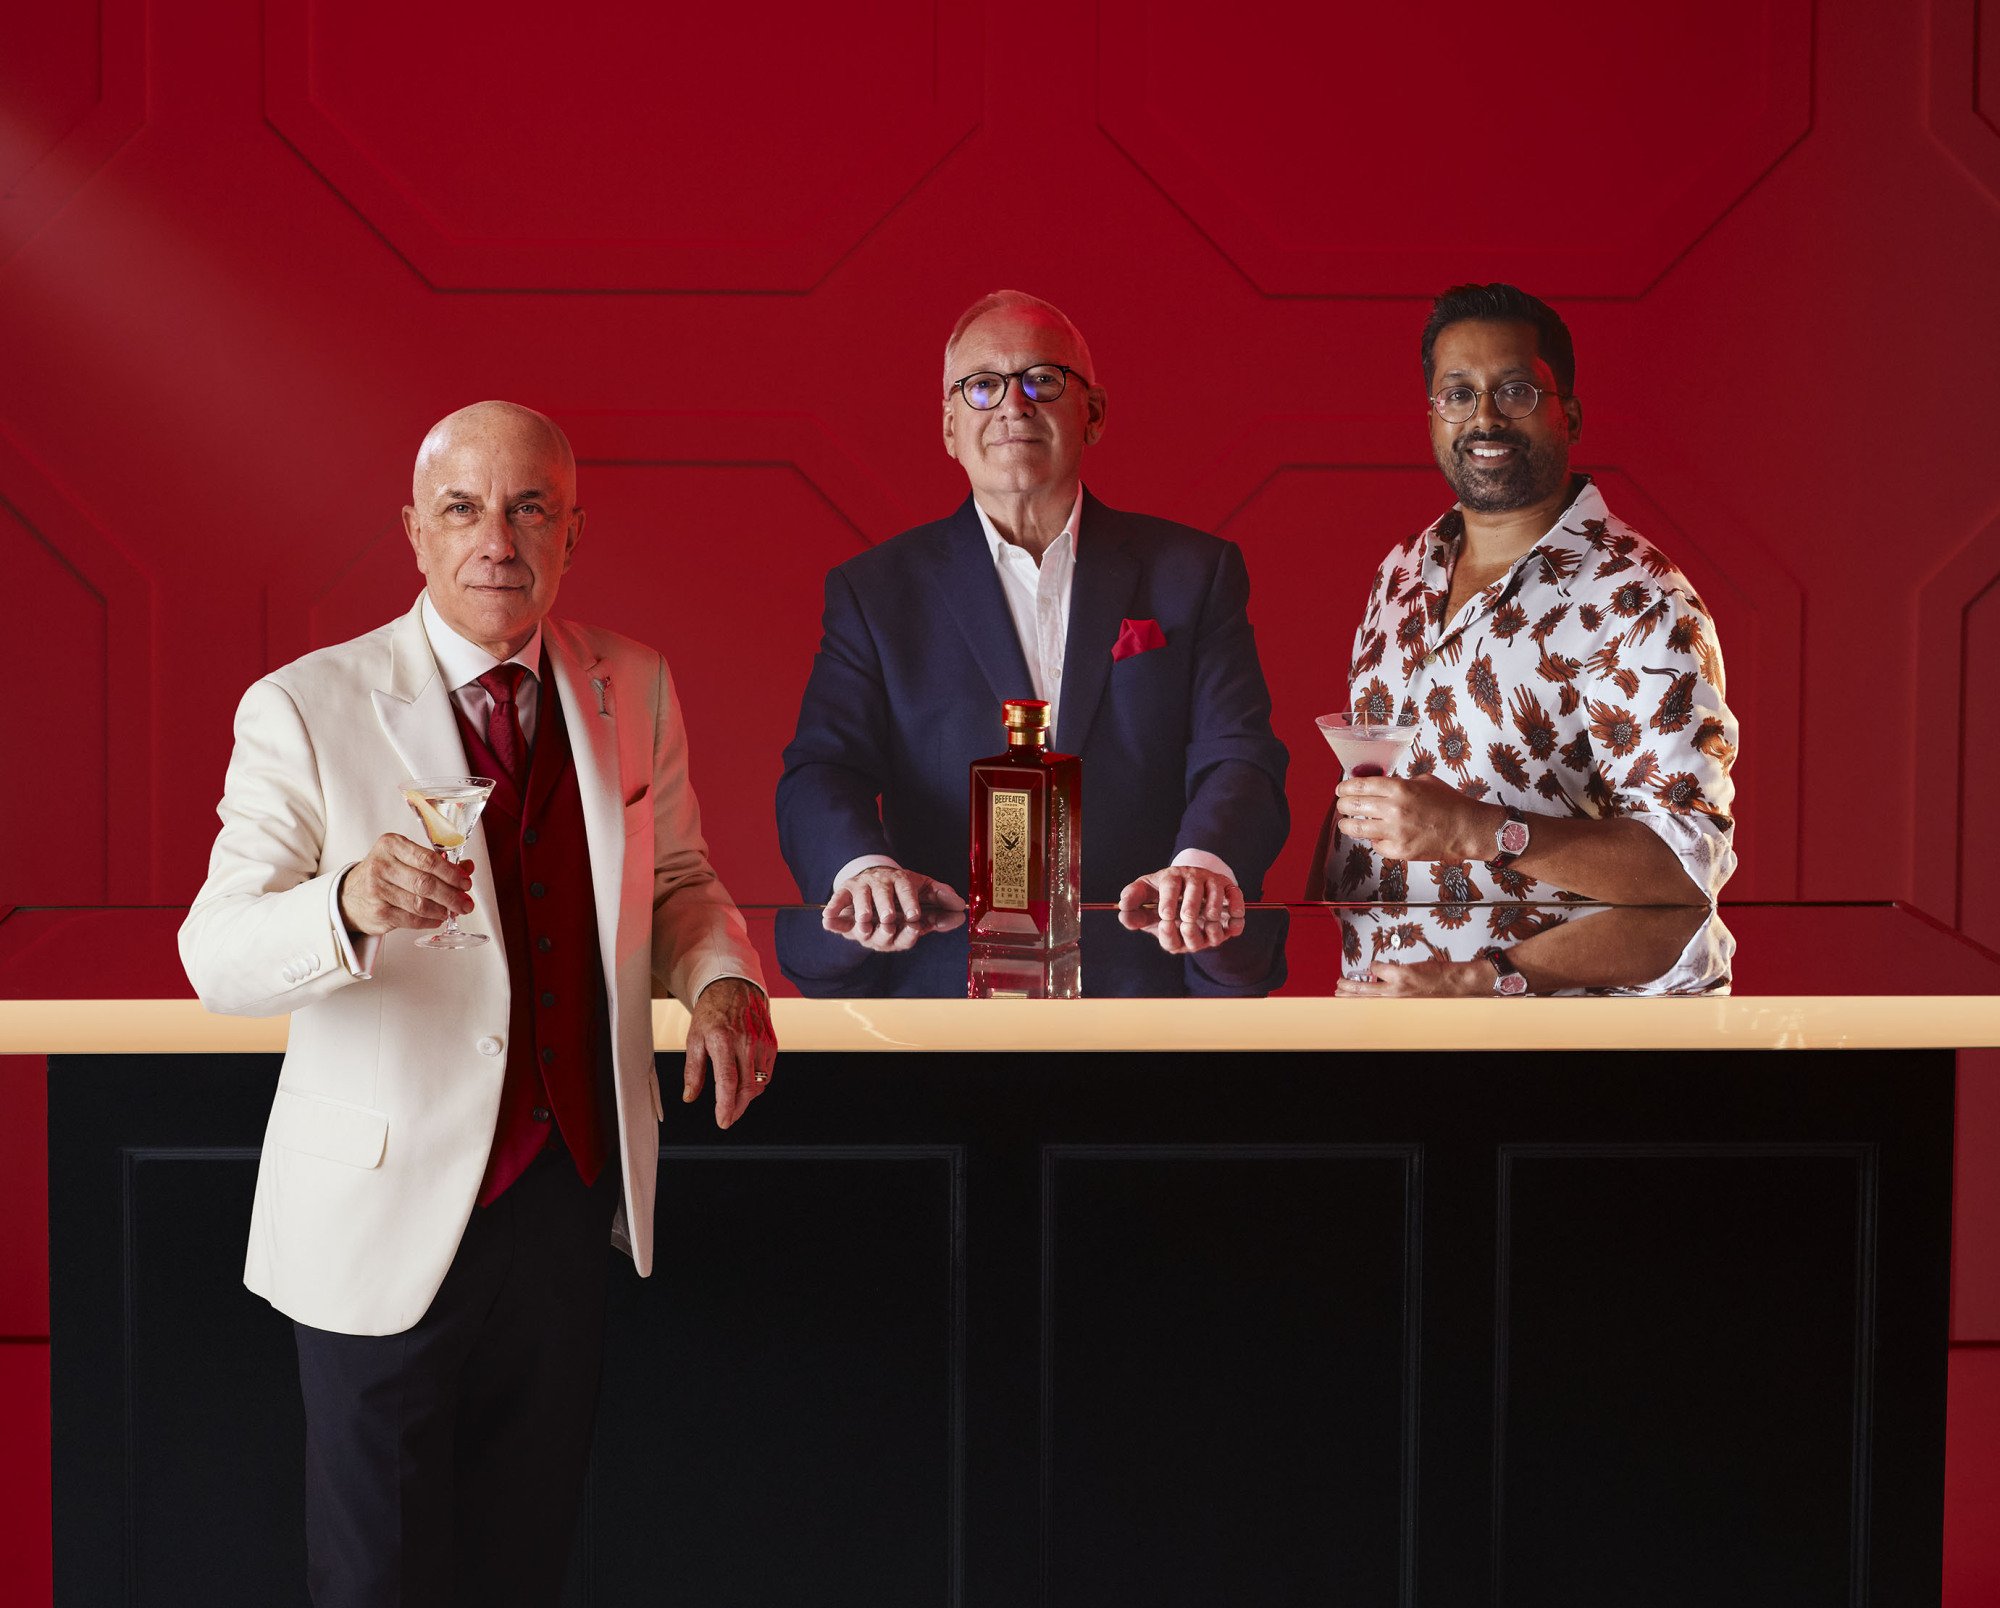 Beefeater Three Bartenders